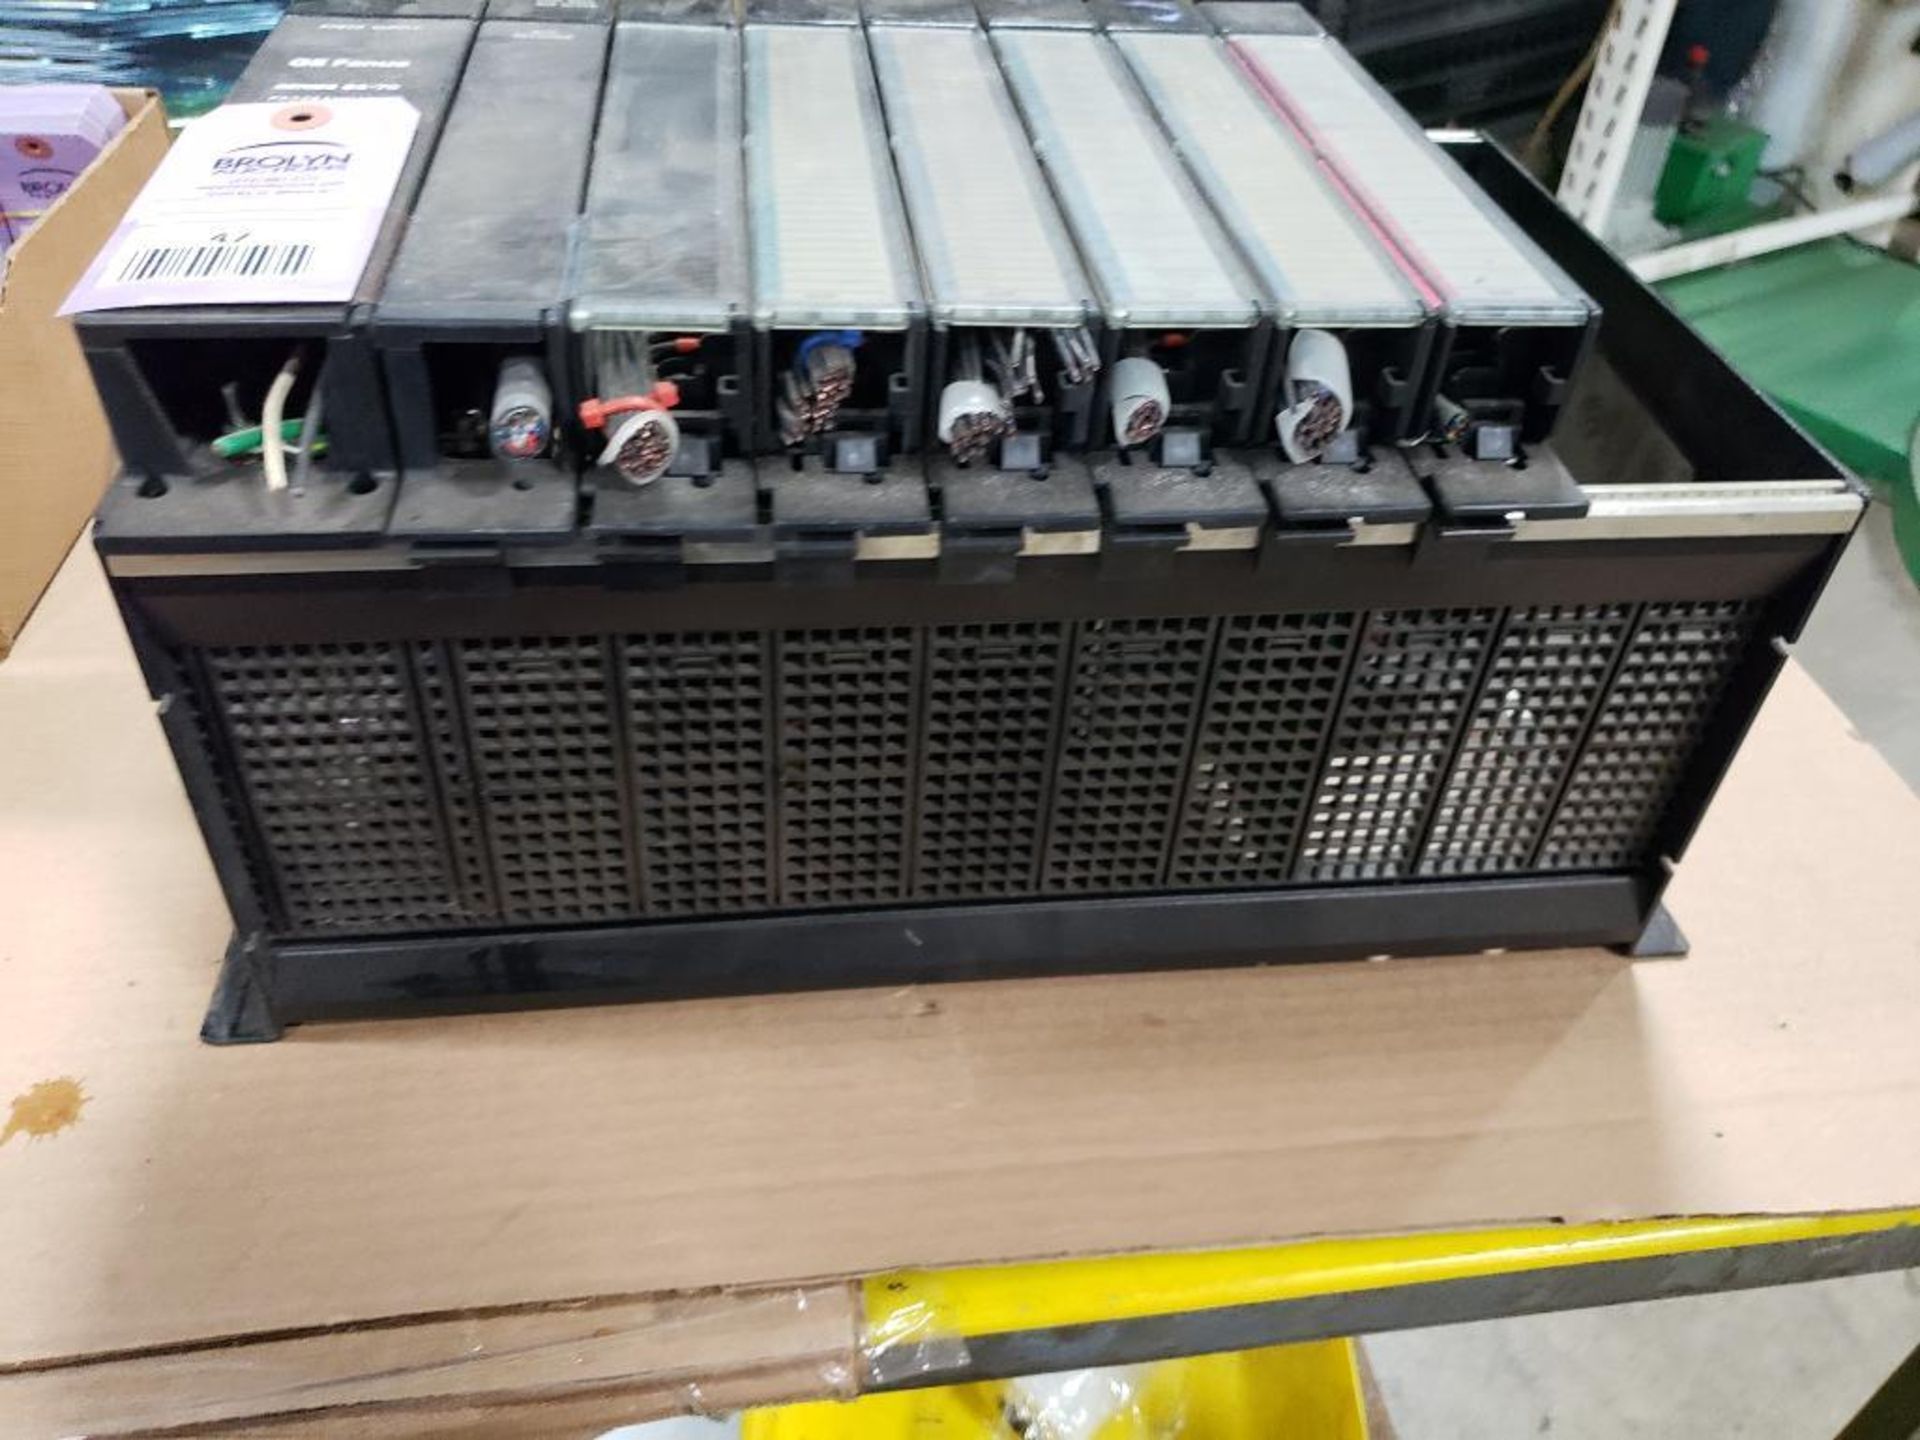 GE Fanuc Series 90-70 programmable controller rack. - Image 5 of 9